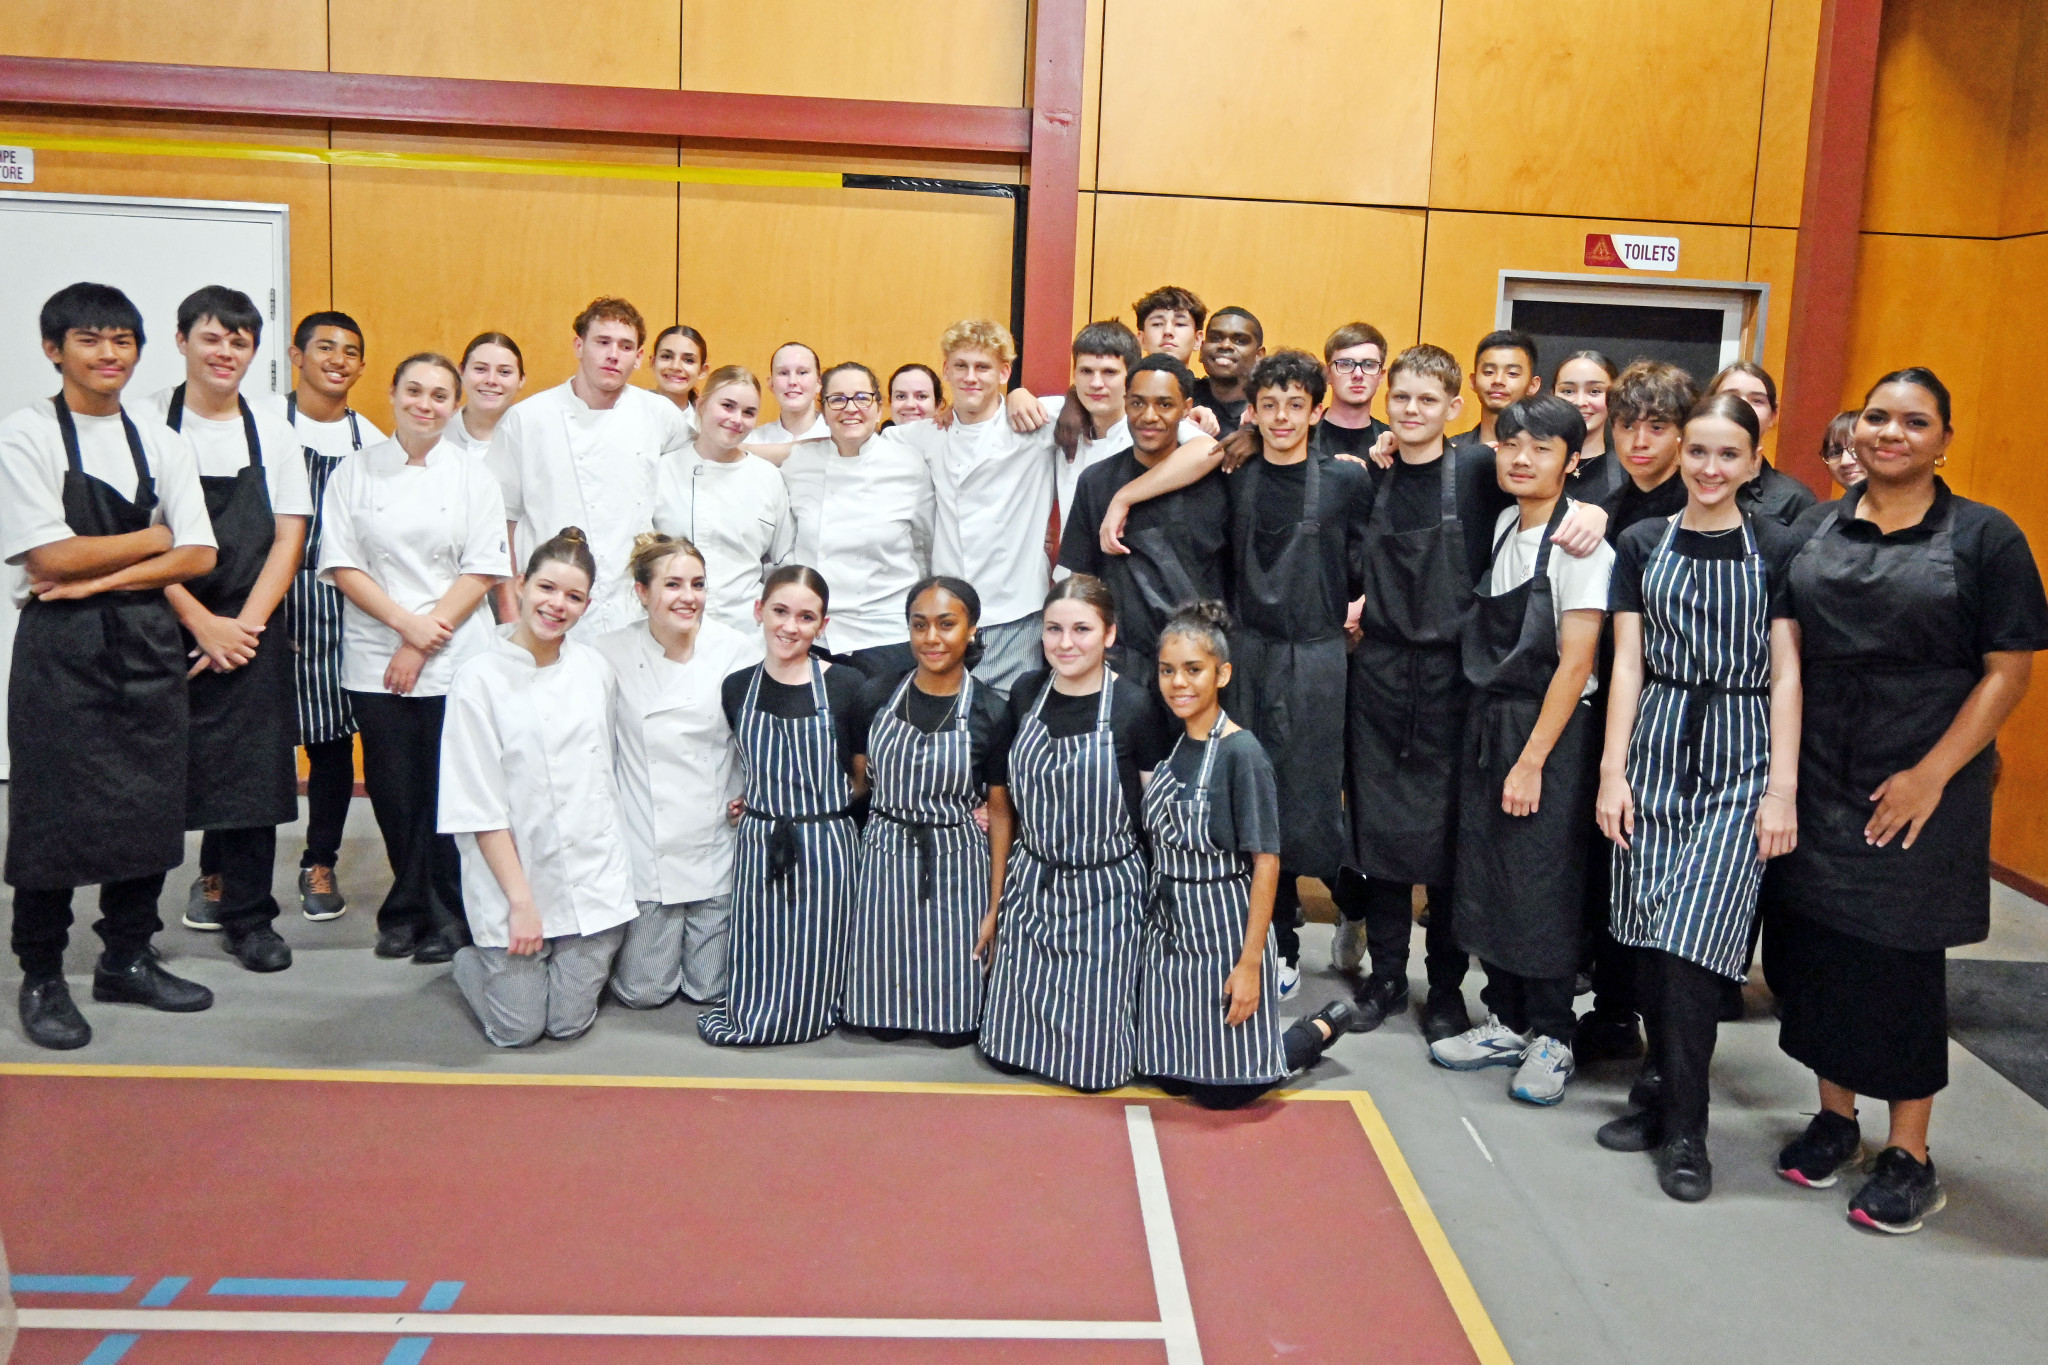 The Good Shepherd Catholic College hospitality students from Years 10, 11 and 12 put on four courses of delight at the school on Friday night.